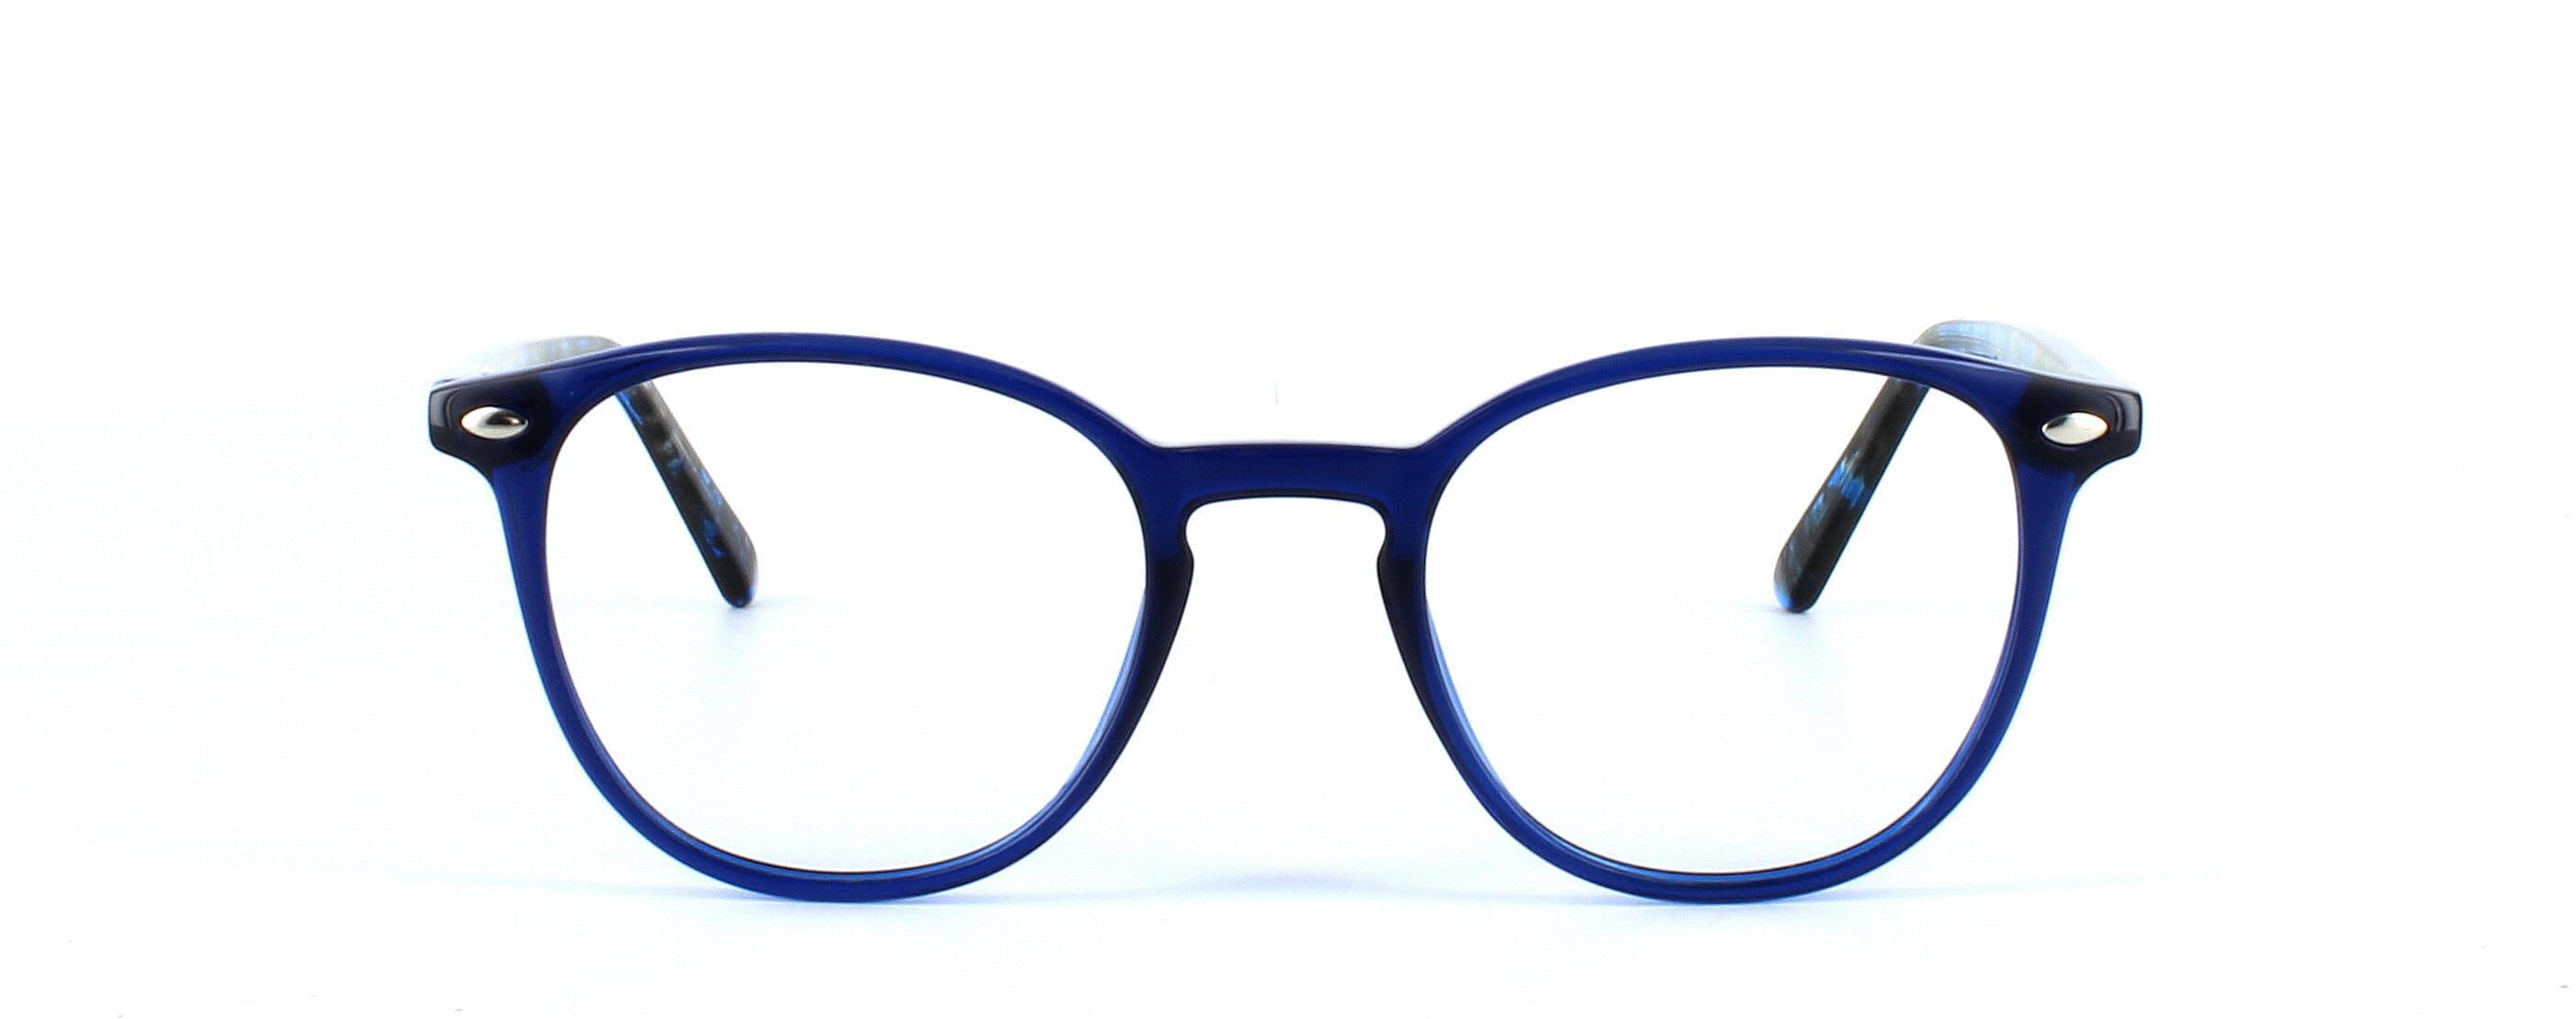 Canis - ladies plastic round shaped glasses frame in blue - image 5